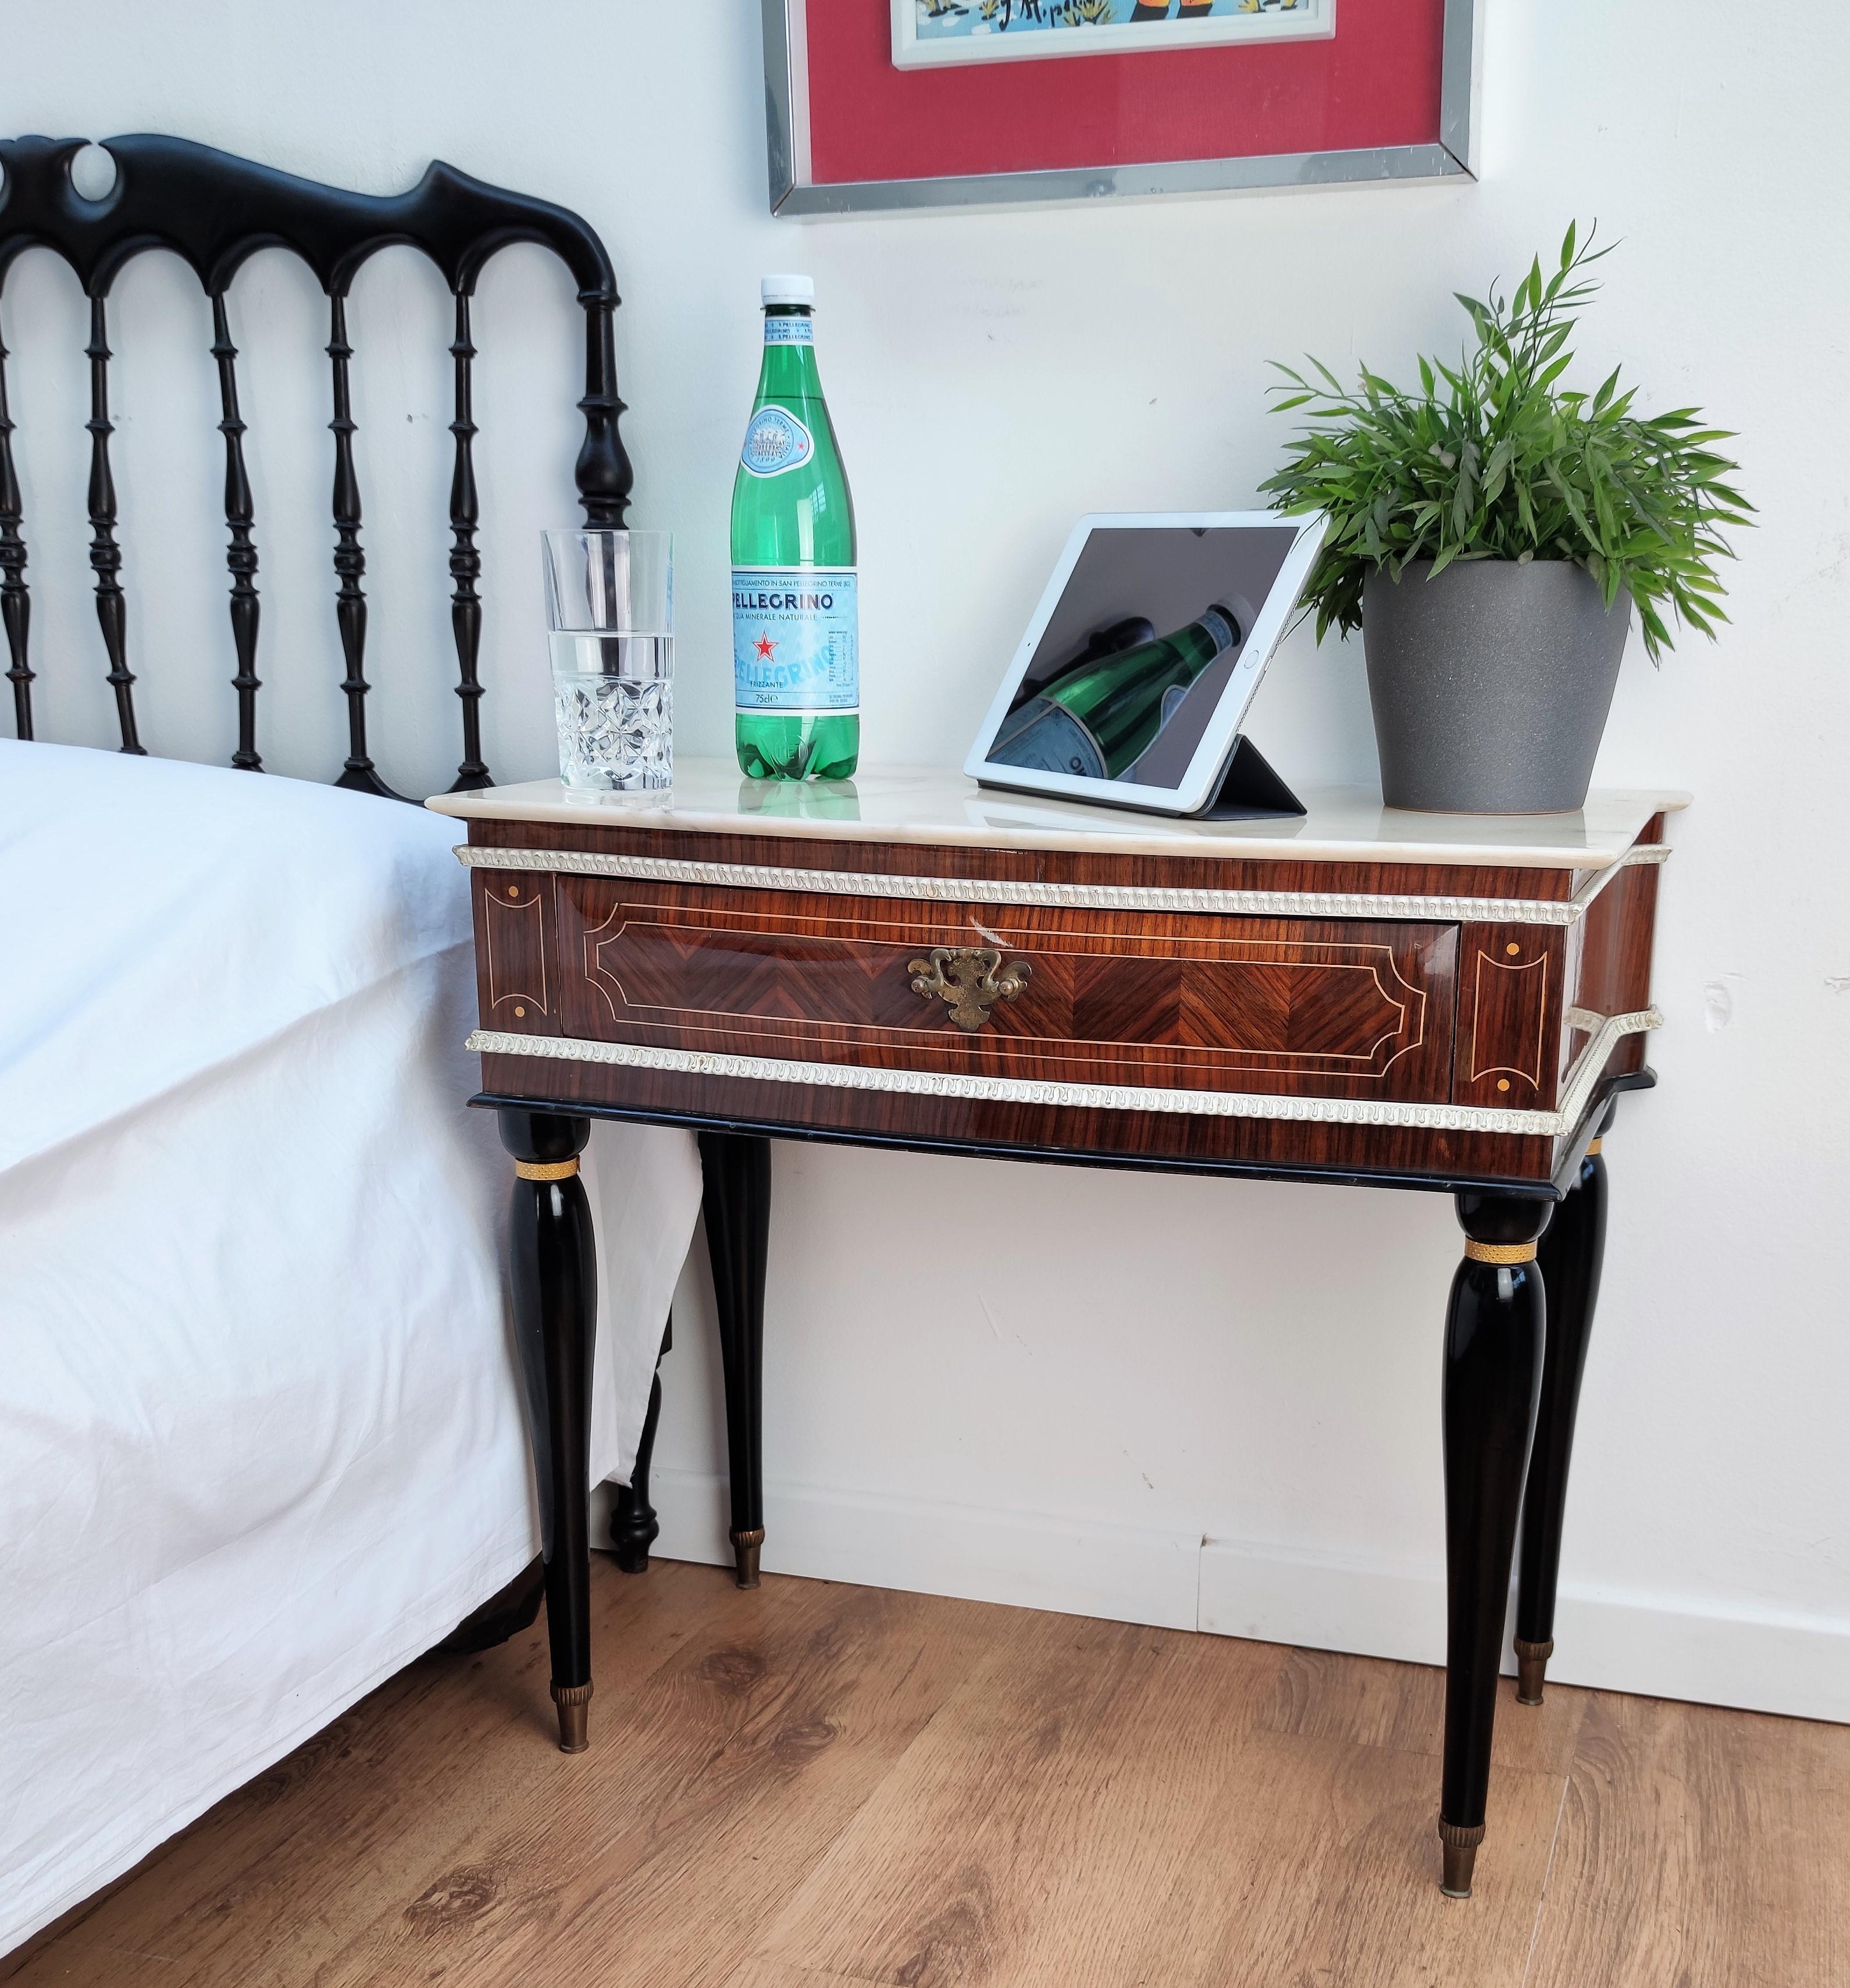 Very elegant and refined Italian 1950s neoclassical pair of bedside tables with inlay walnut veneer wood, drawer with brass handle, black legs with brass final and white marble top. Those nightstands make a great look in any style bedroom, as a